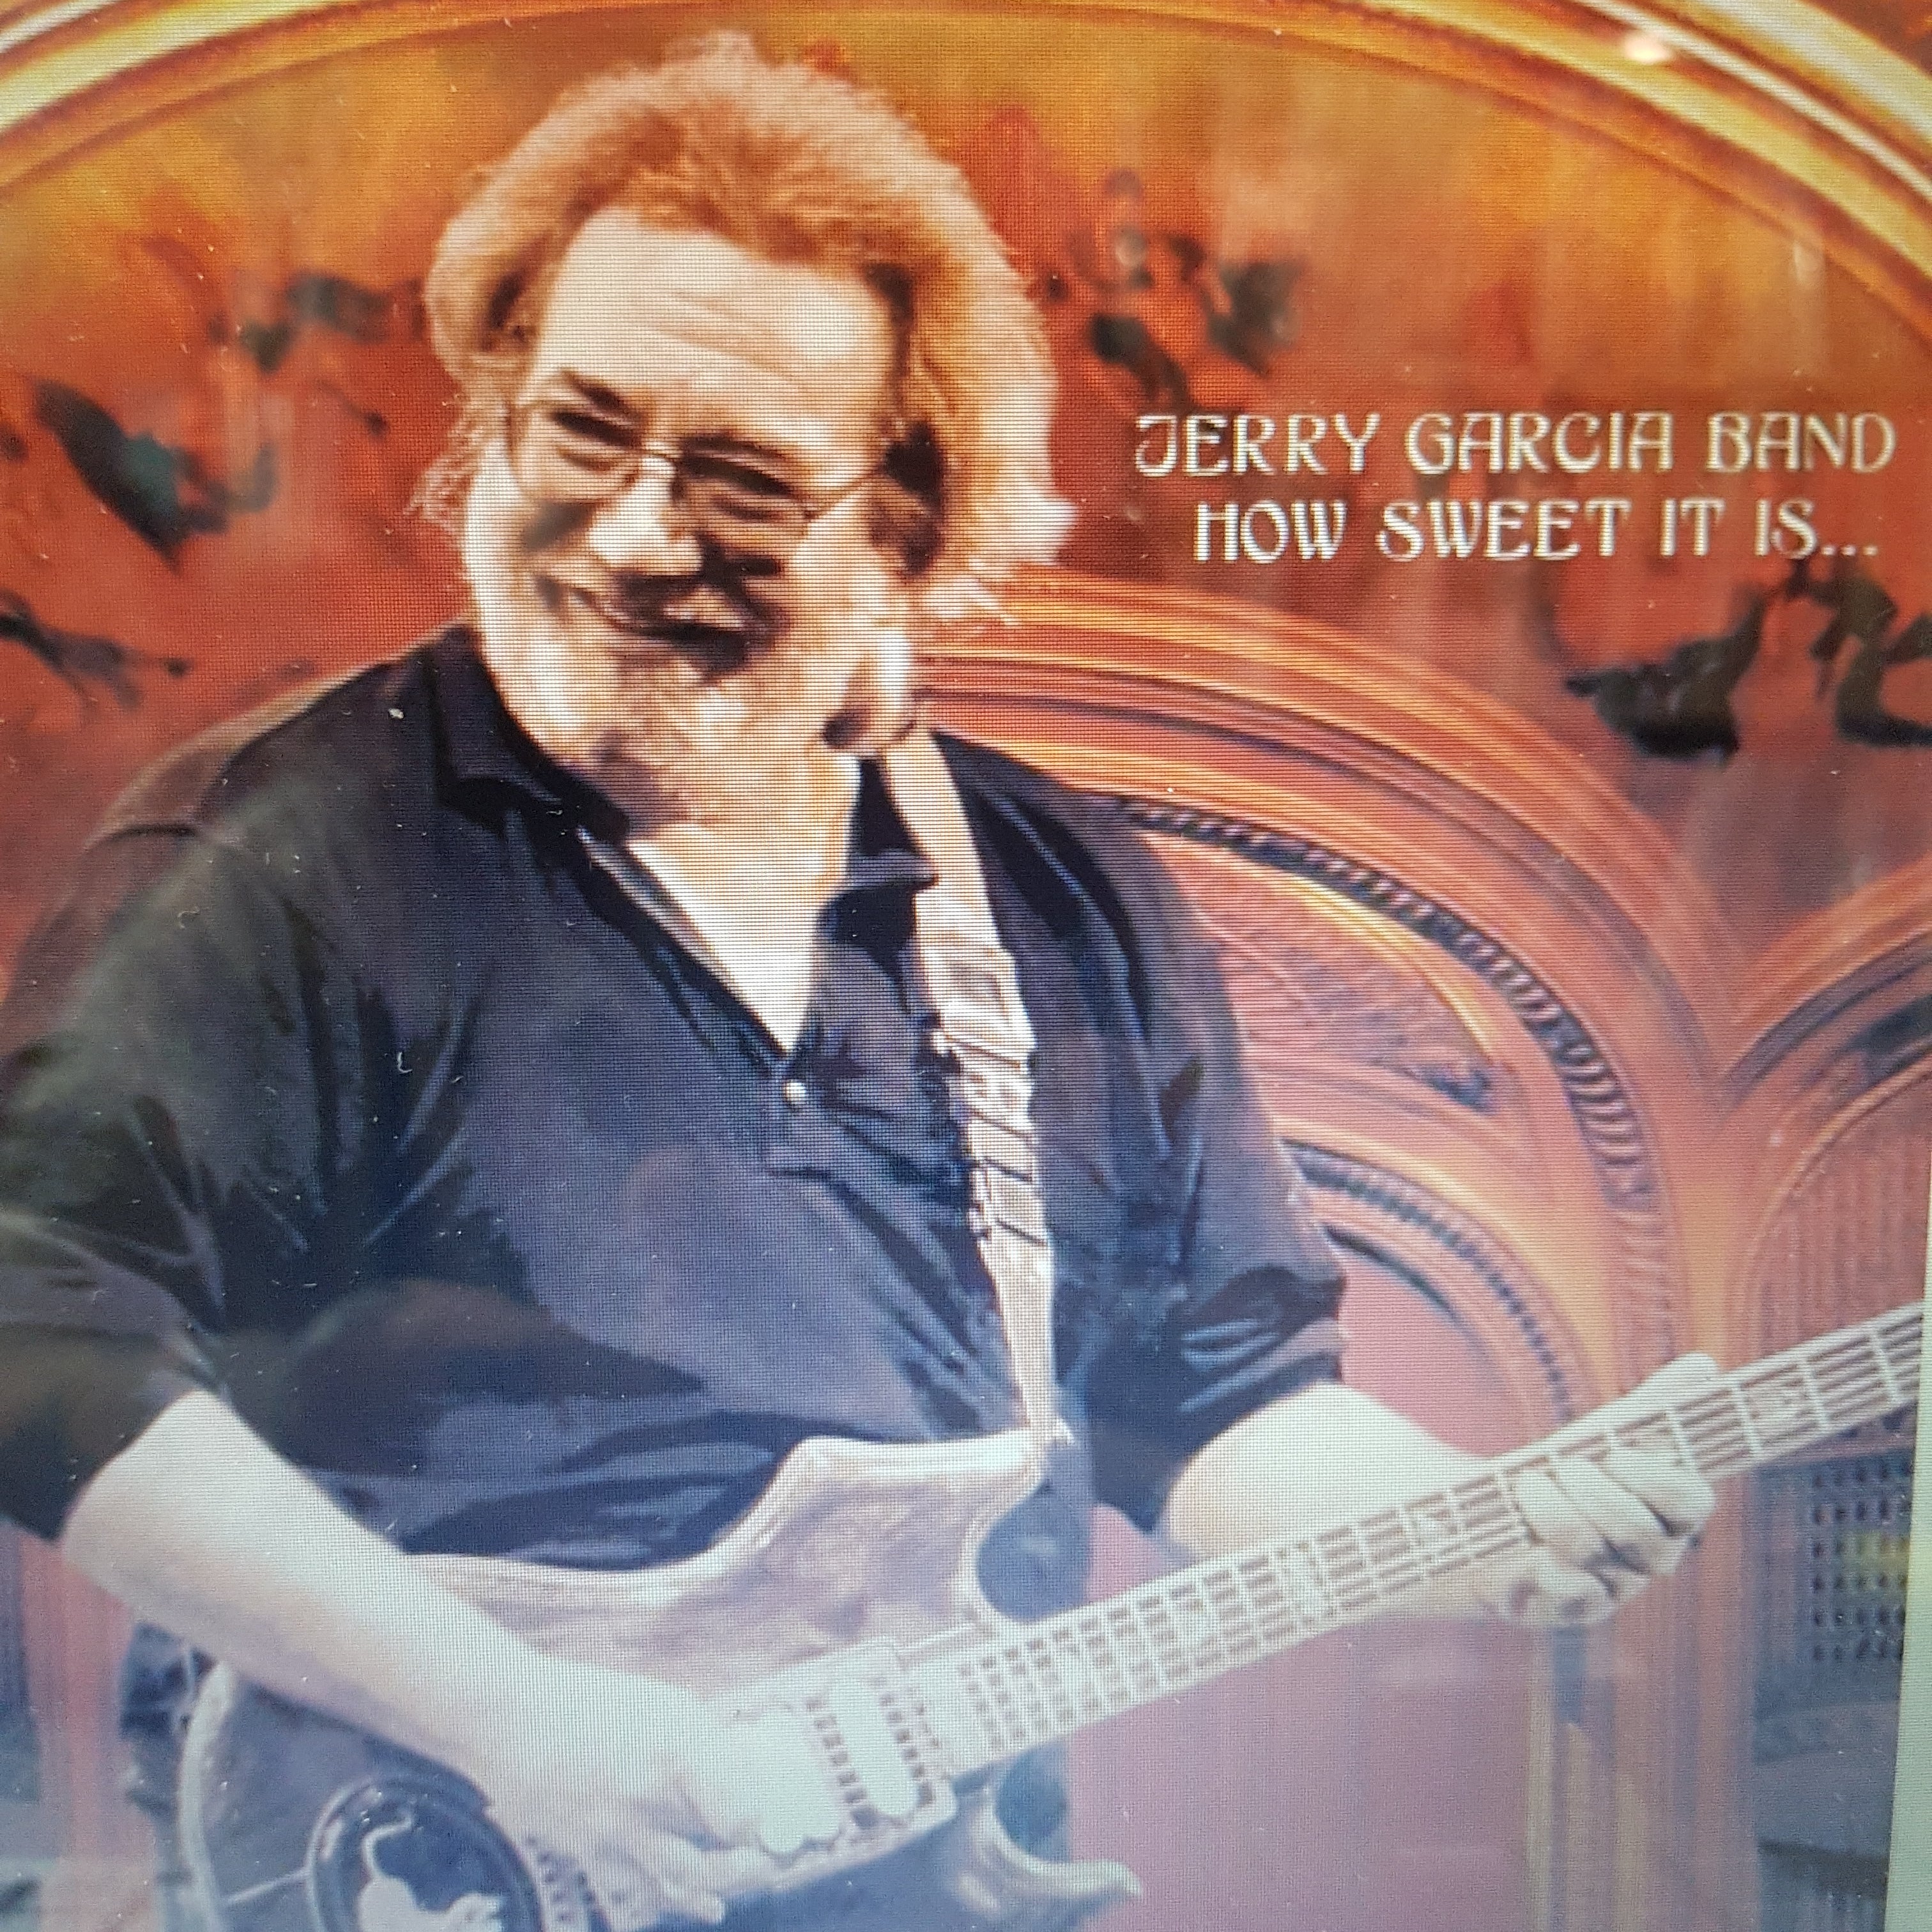 JERRY GARCIA BAND - HOW SWEET IT IS: LIVE AT WARFIELD THEATRE 1990 (2L –  GrevilleRecords